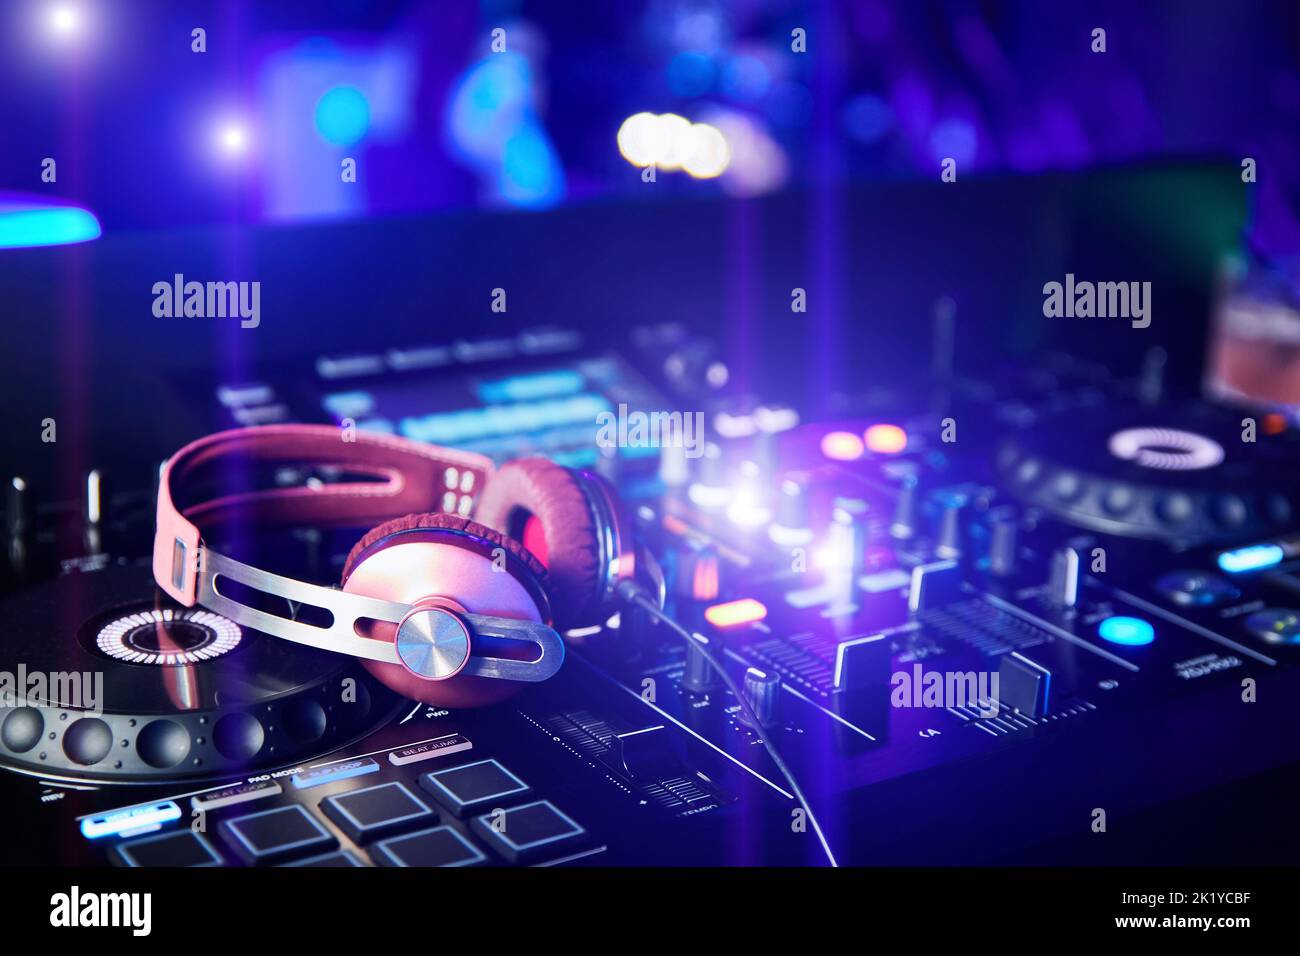 Pink DJ headphones on sound mixer and turntables in night club Stock Photo